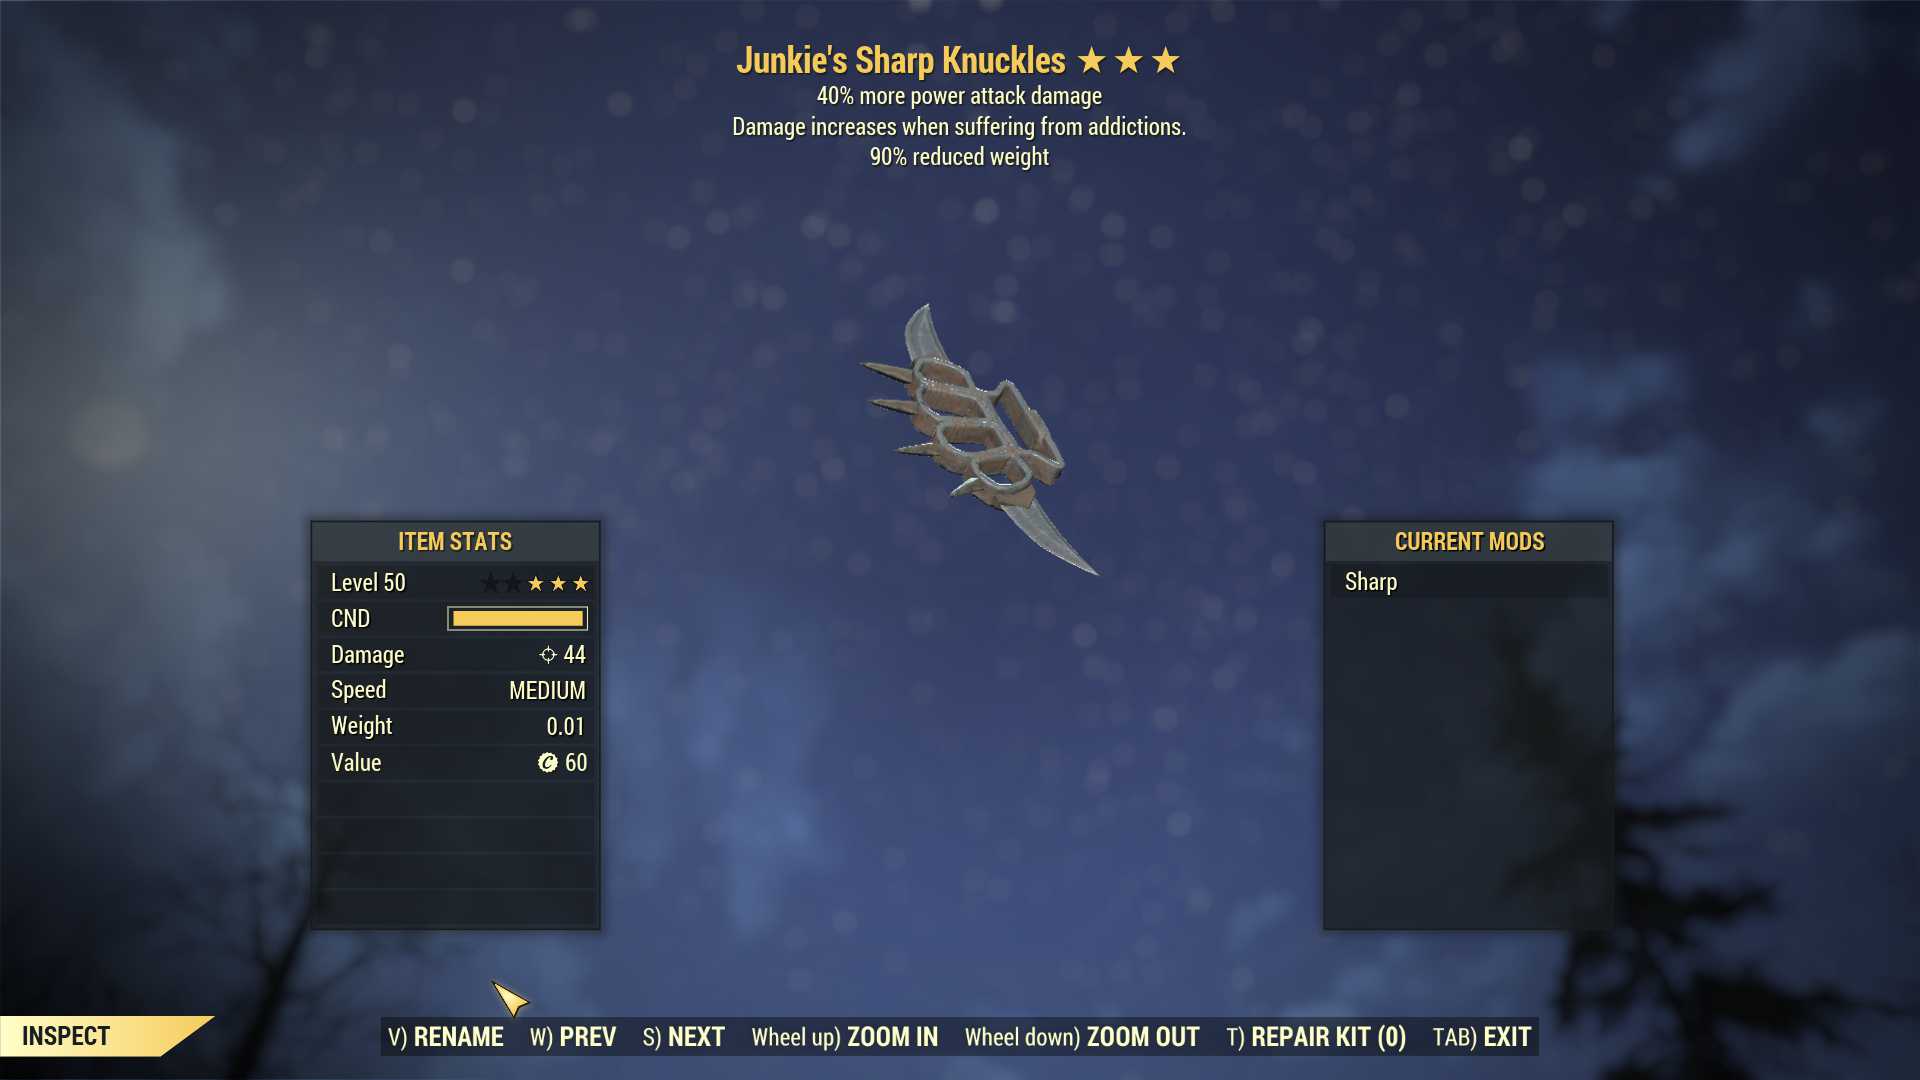 Junkie's Knuckles (+40% damage PA, 90% reduced weight)